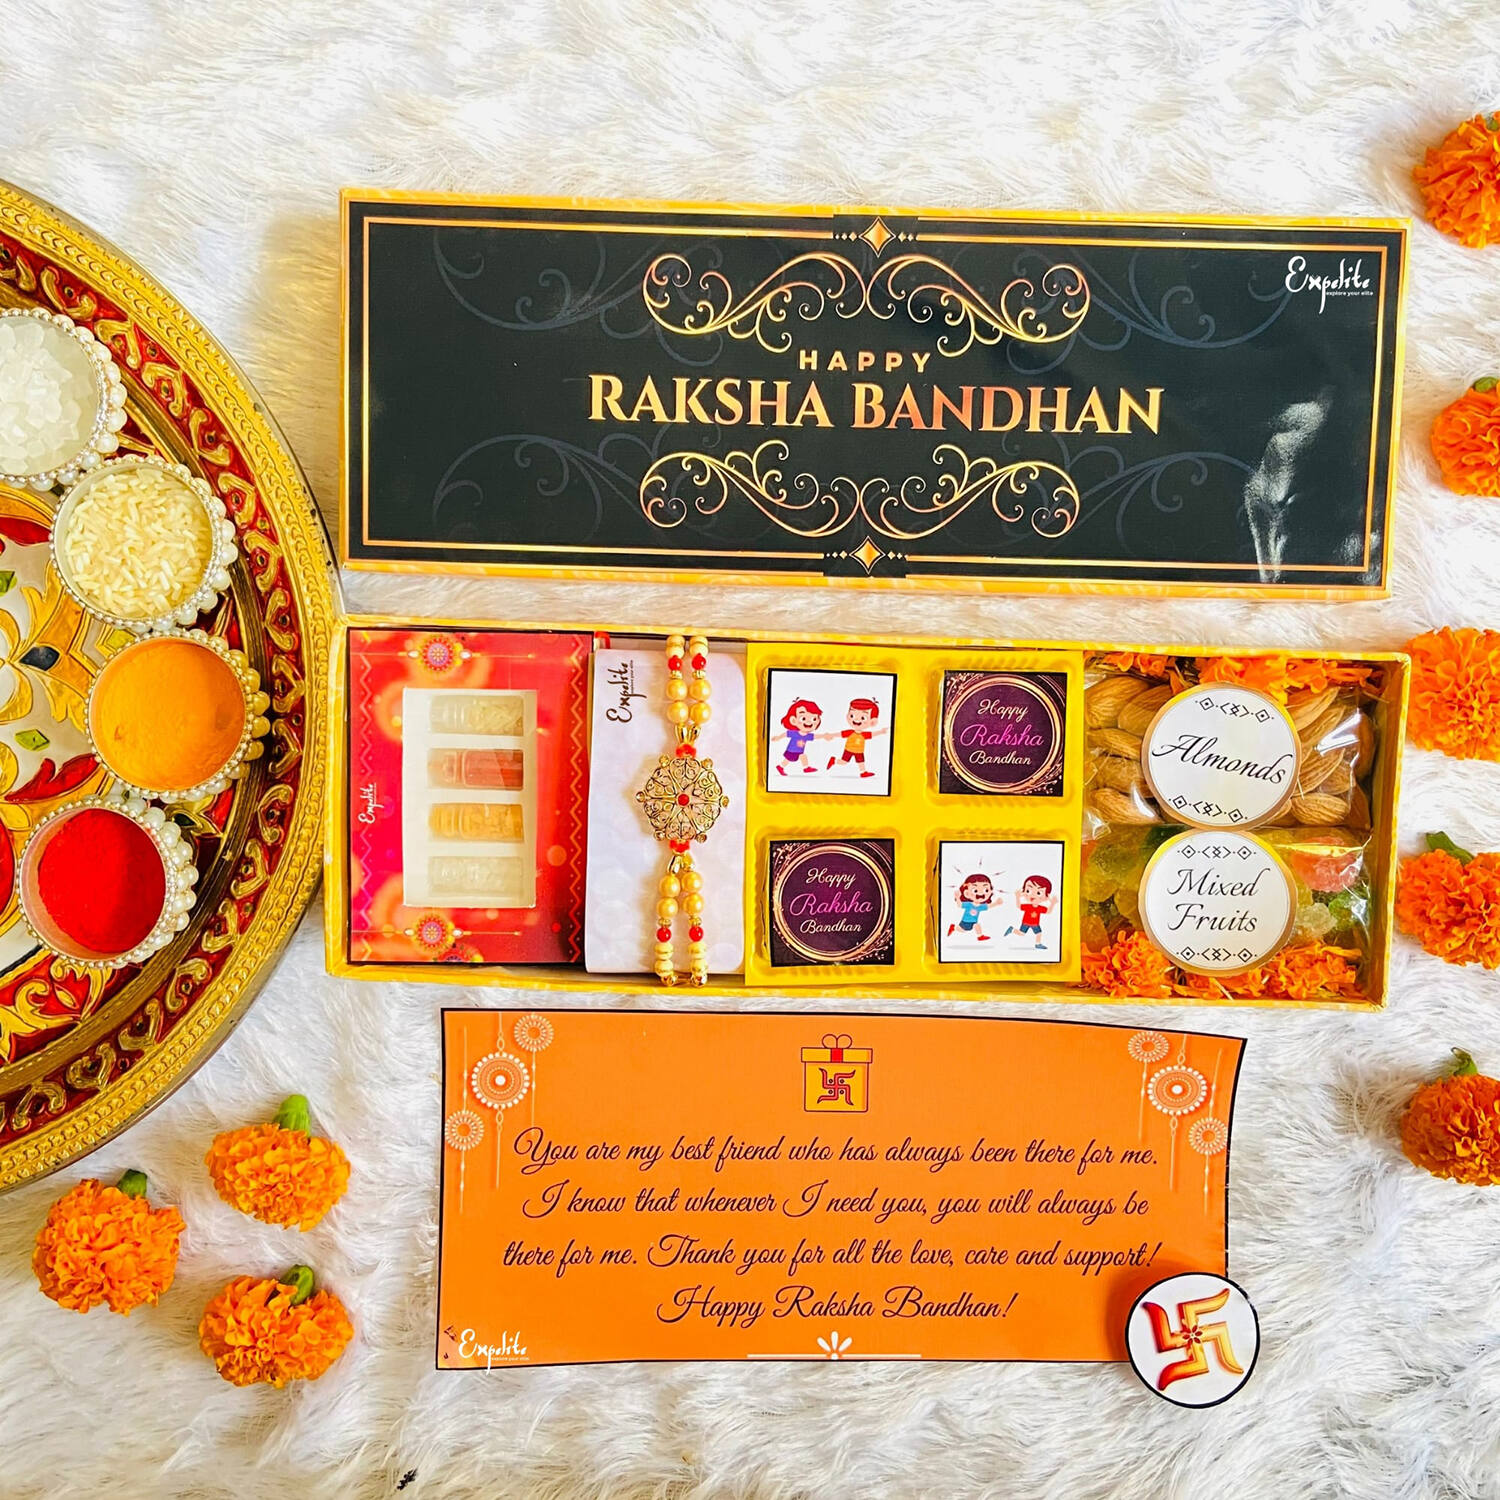 Buy Online: Affordable and Unique Rakhi Gifts for Sisters